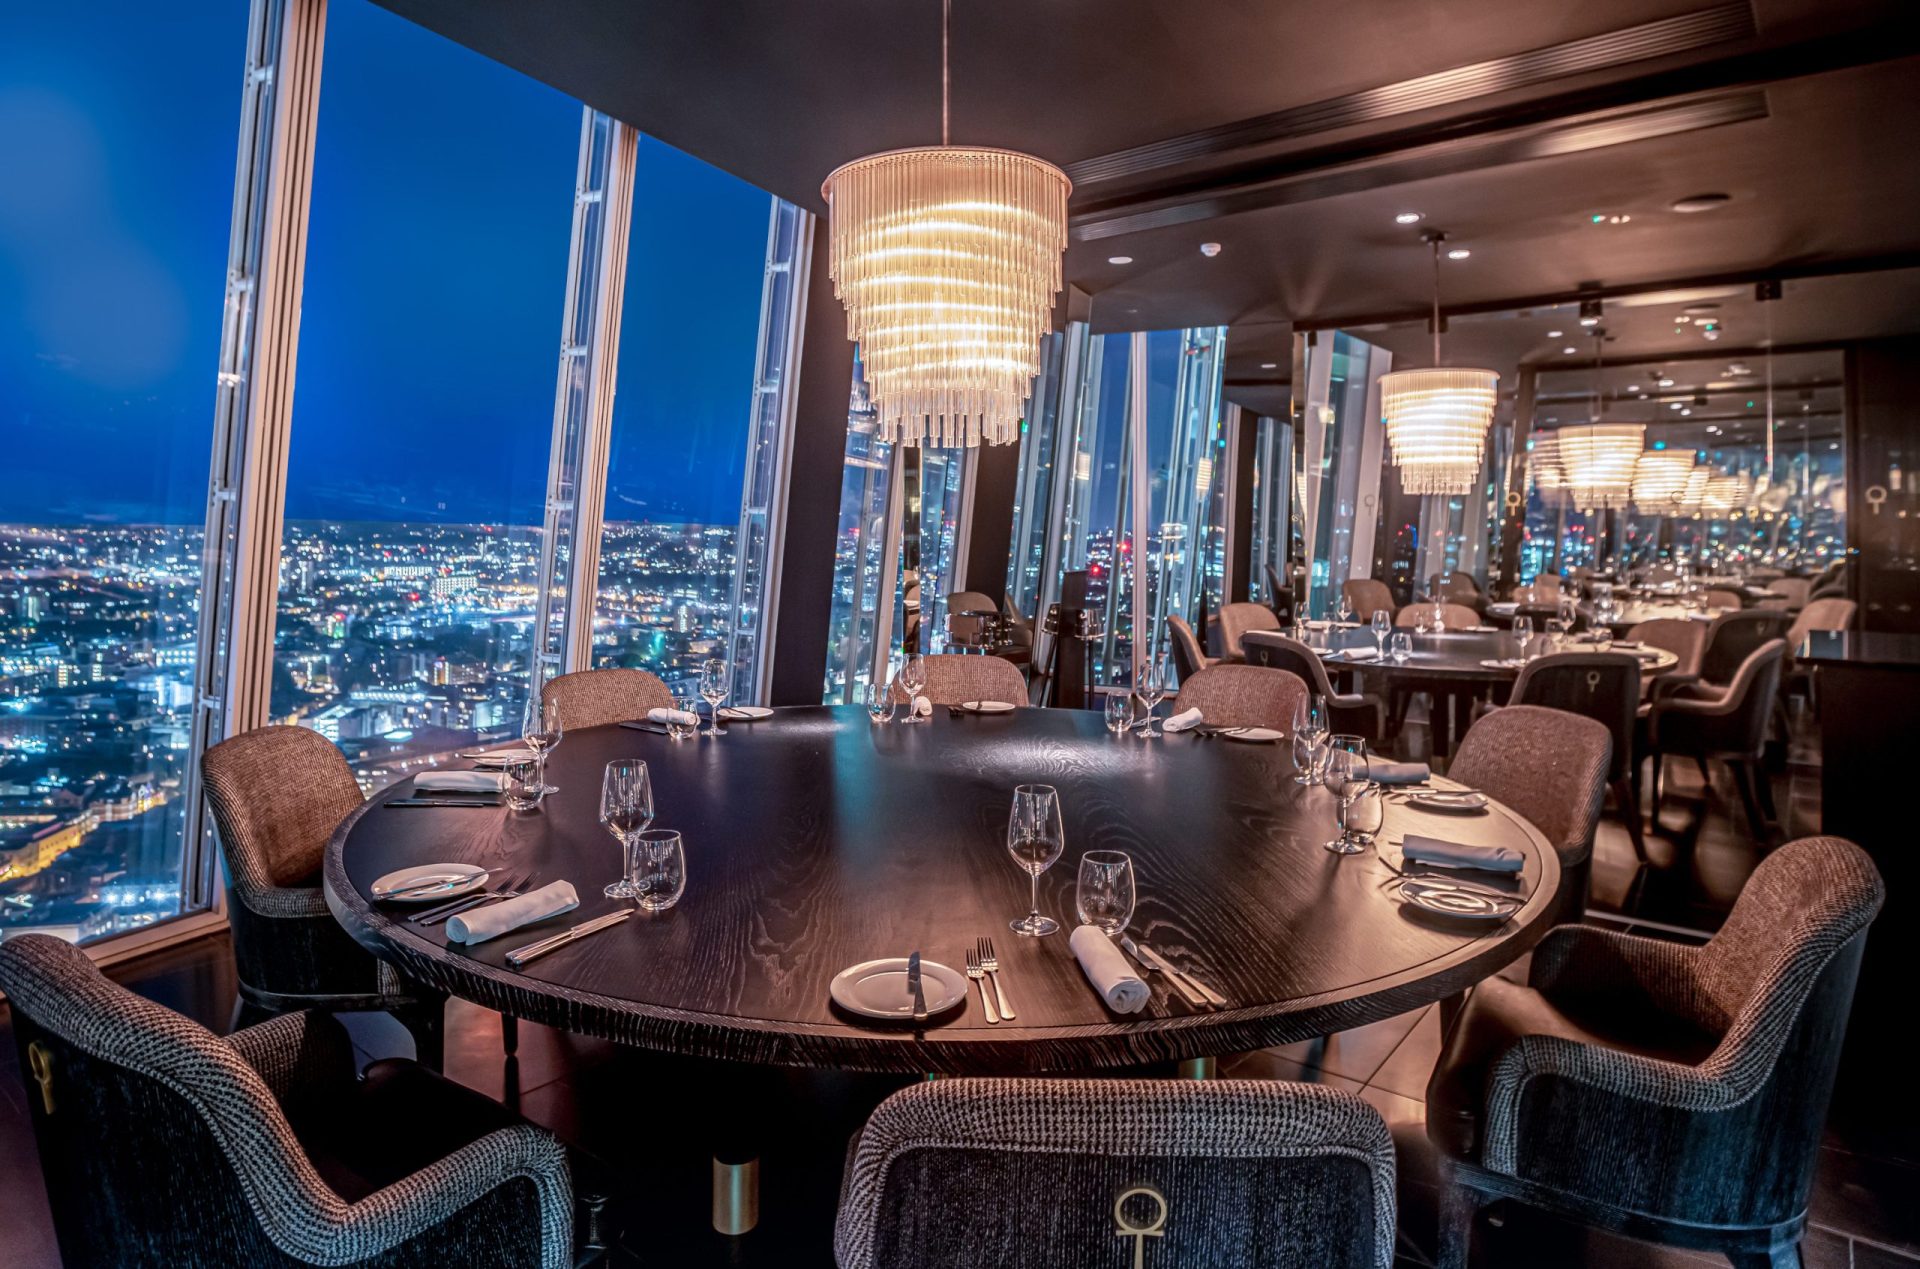 AQUA INNER CIRCLE
Introducing Aqua Inner Circle – the exclusive private dining loyalty scheme giving you access to a host of rewards and benefits.
find out more
